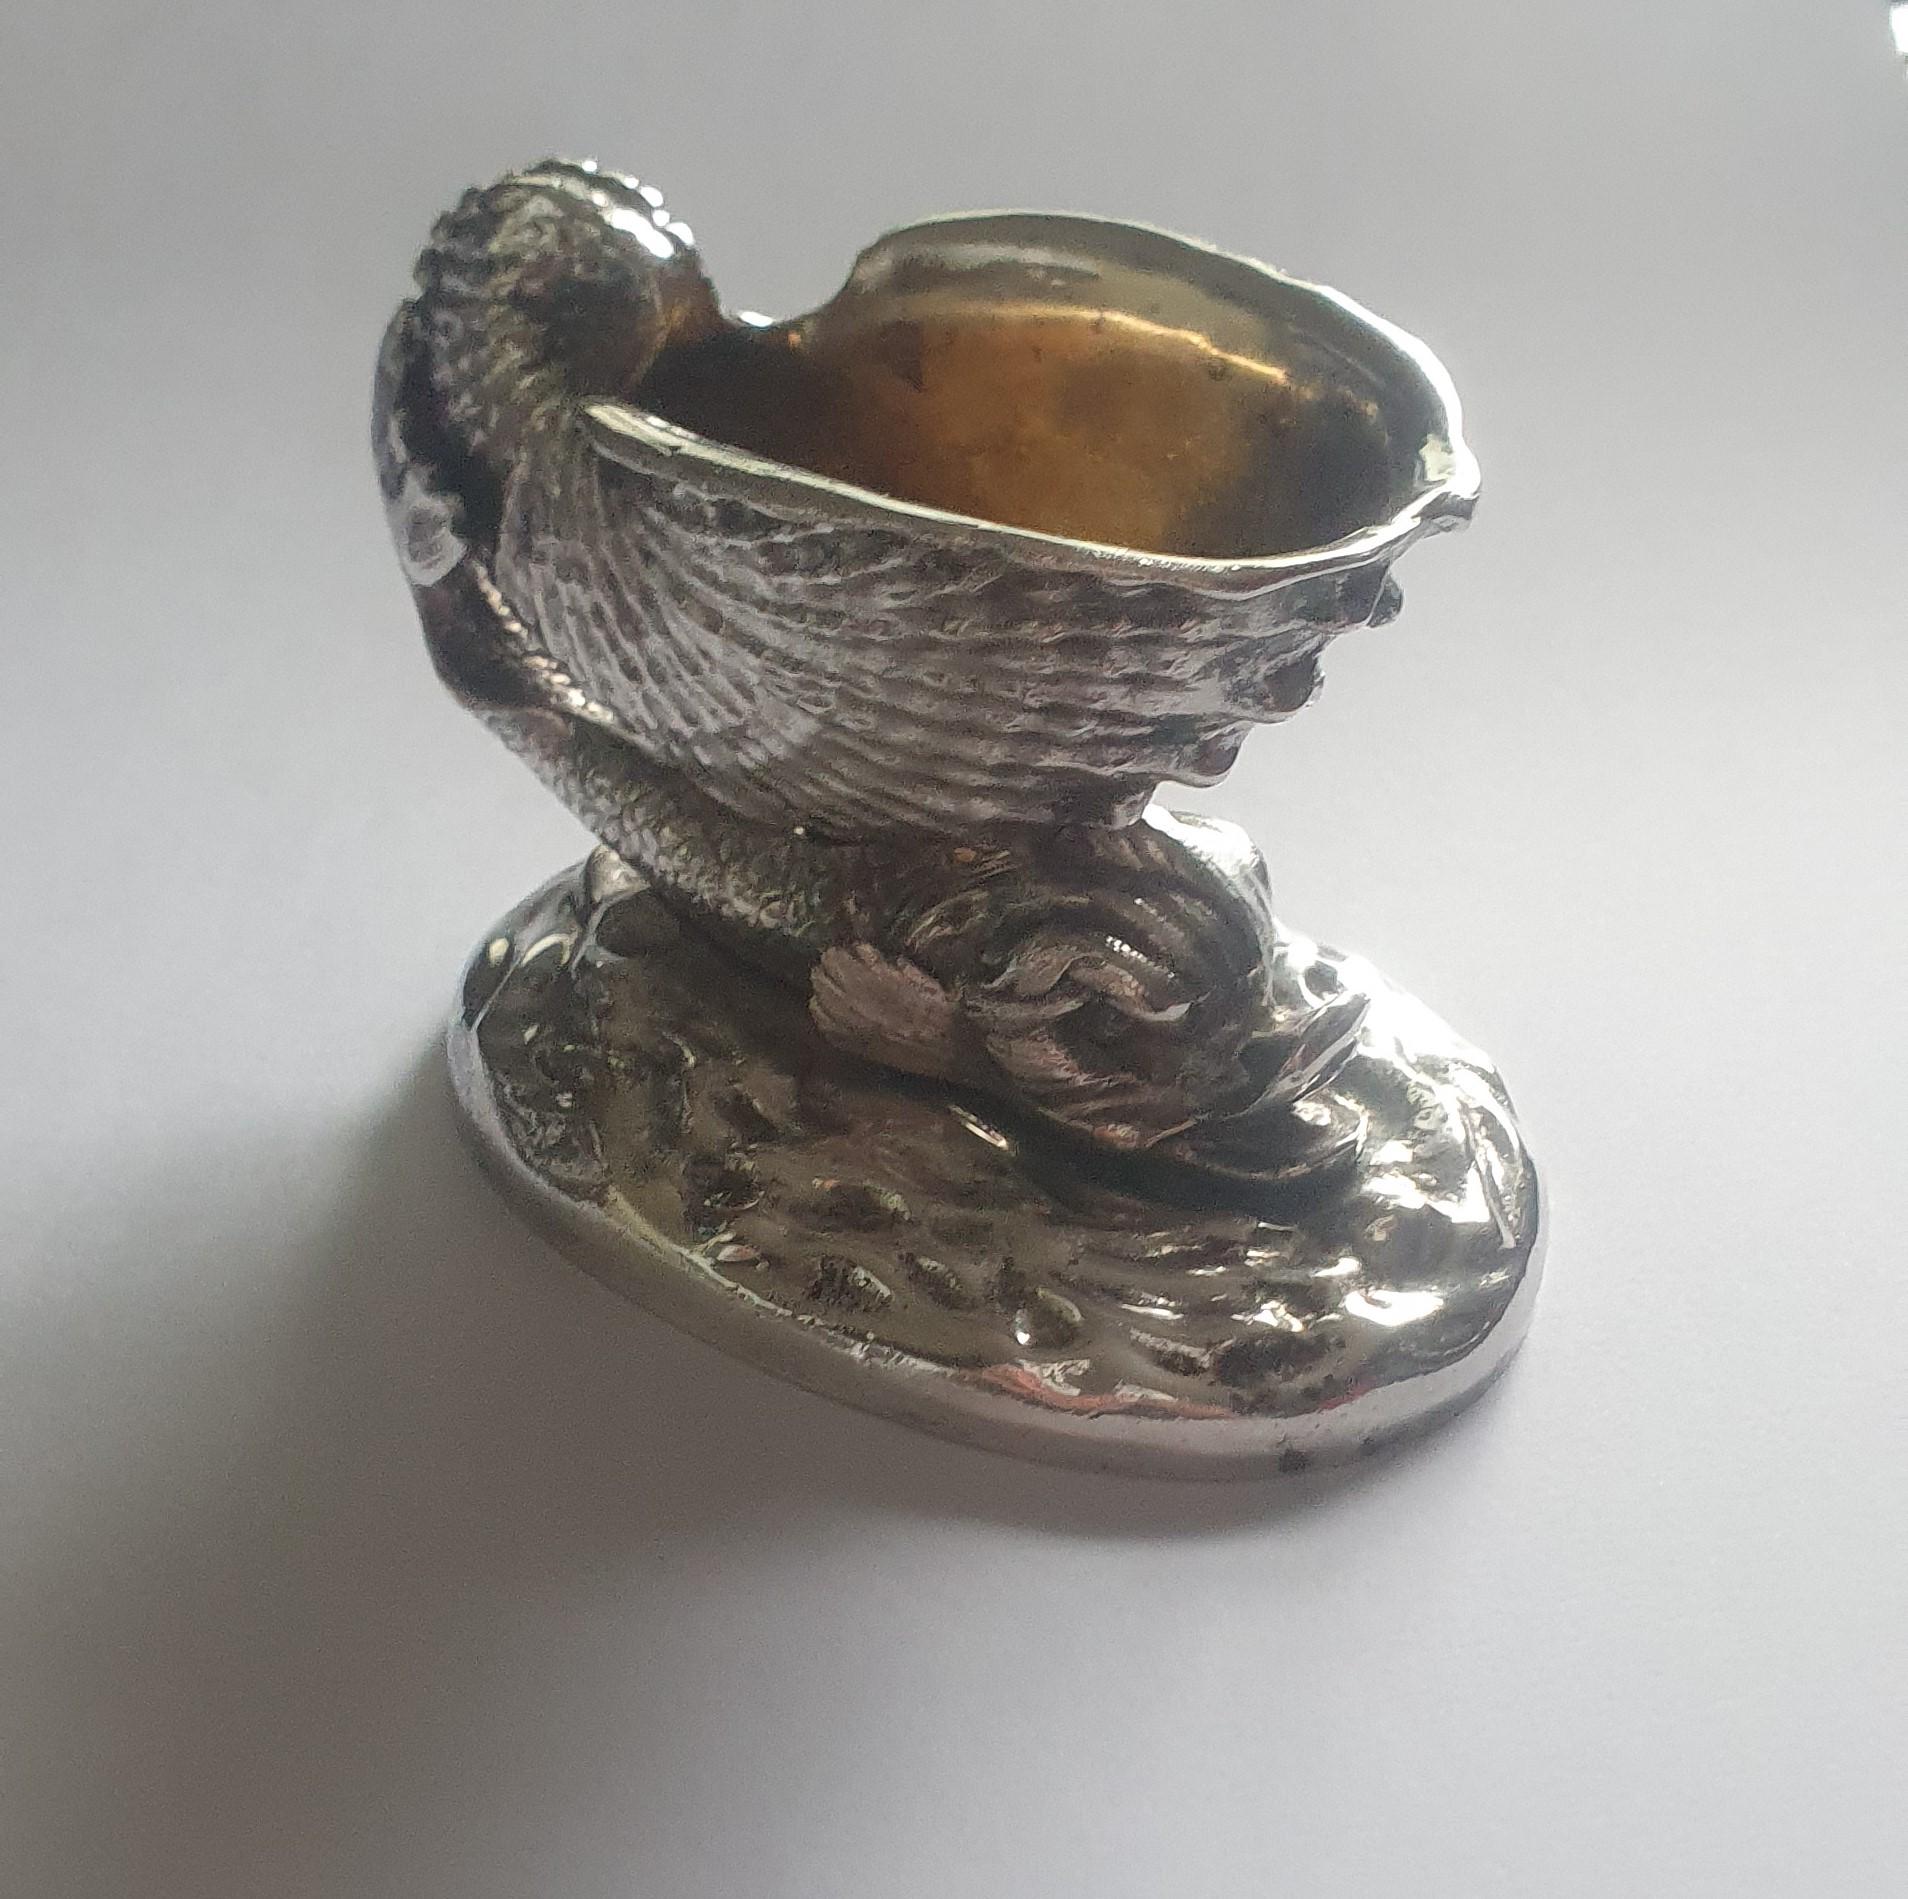 A stunning Elkington & Co, 19th century silver plated and silver gilt Dolphin & Clam Shell Open Salt cellar Dating to the latter part of the 19th century. This is a really fine example of an elaborate, also a scarce form of a Maltese dolphin